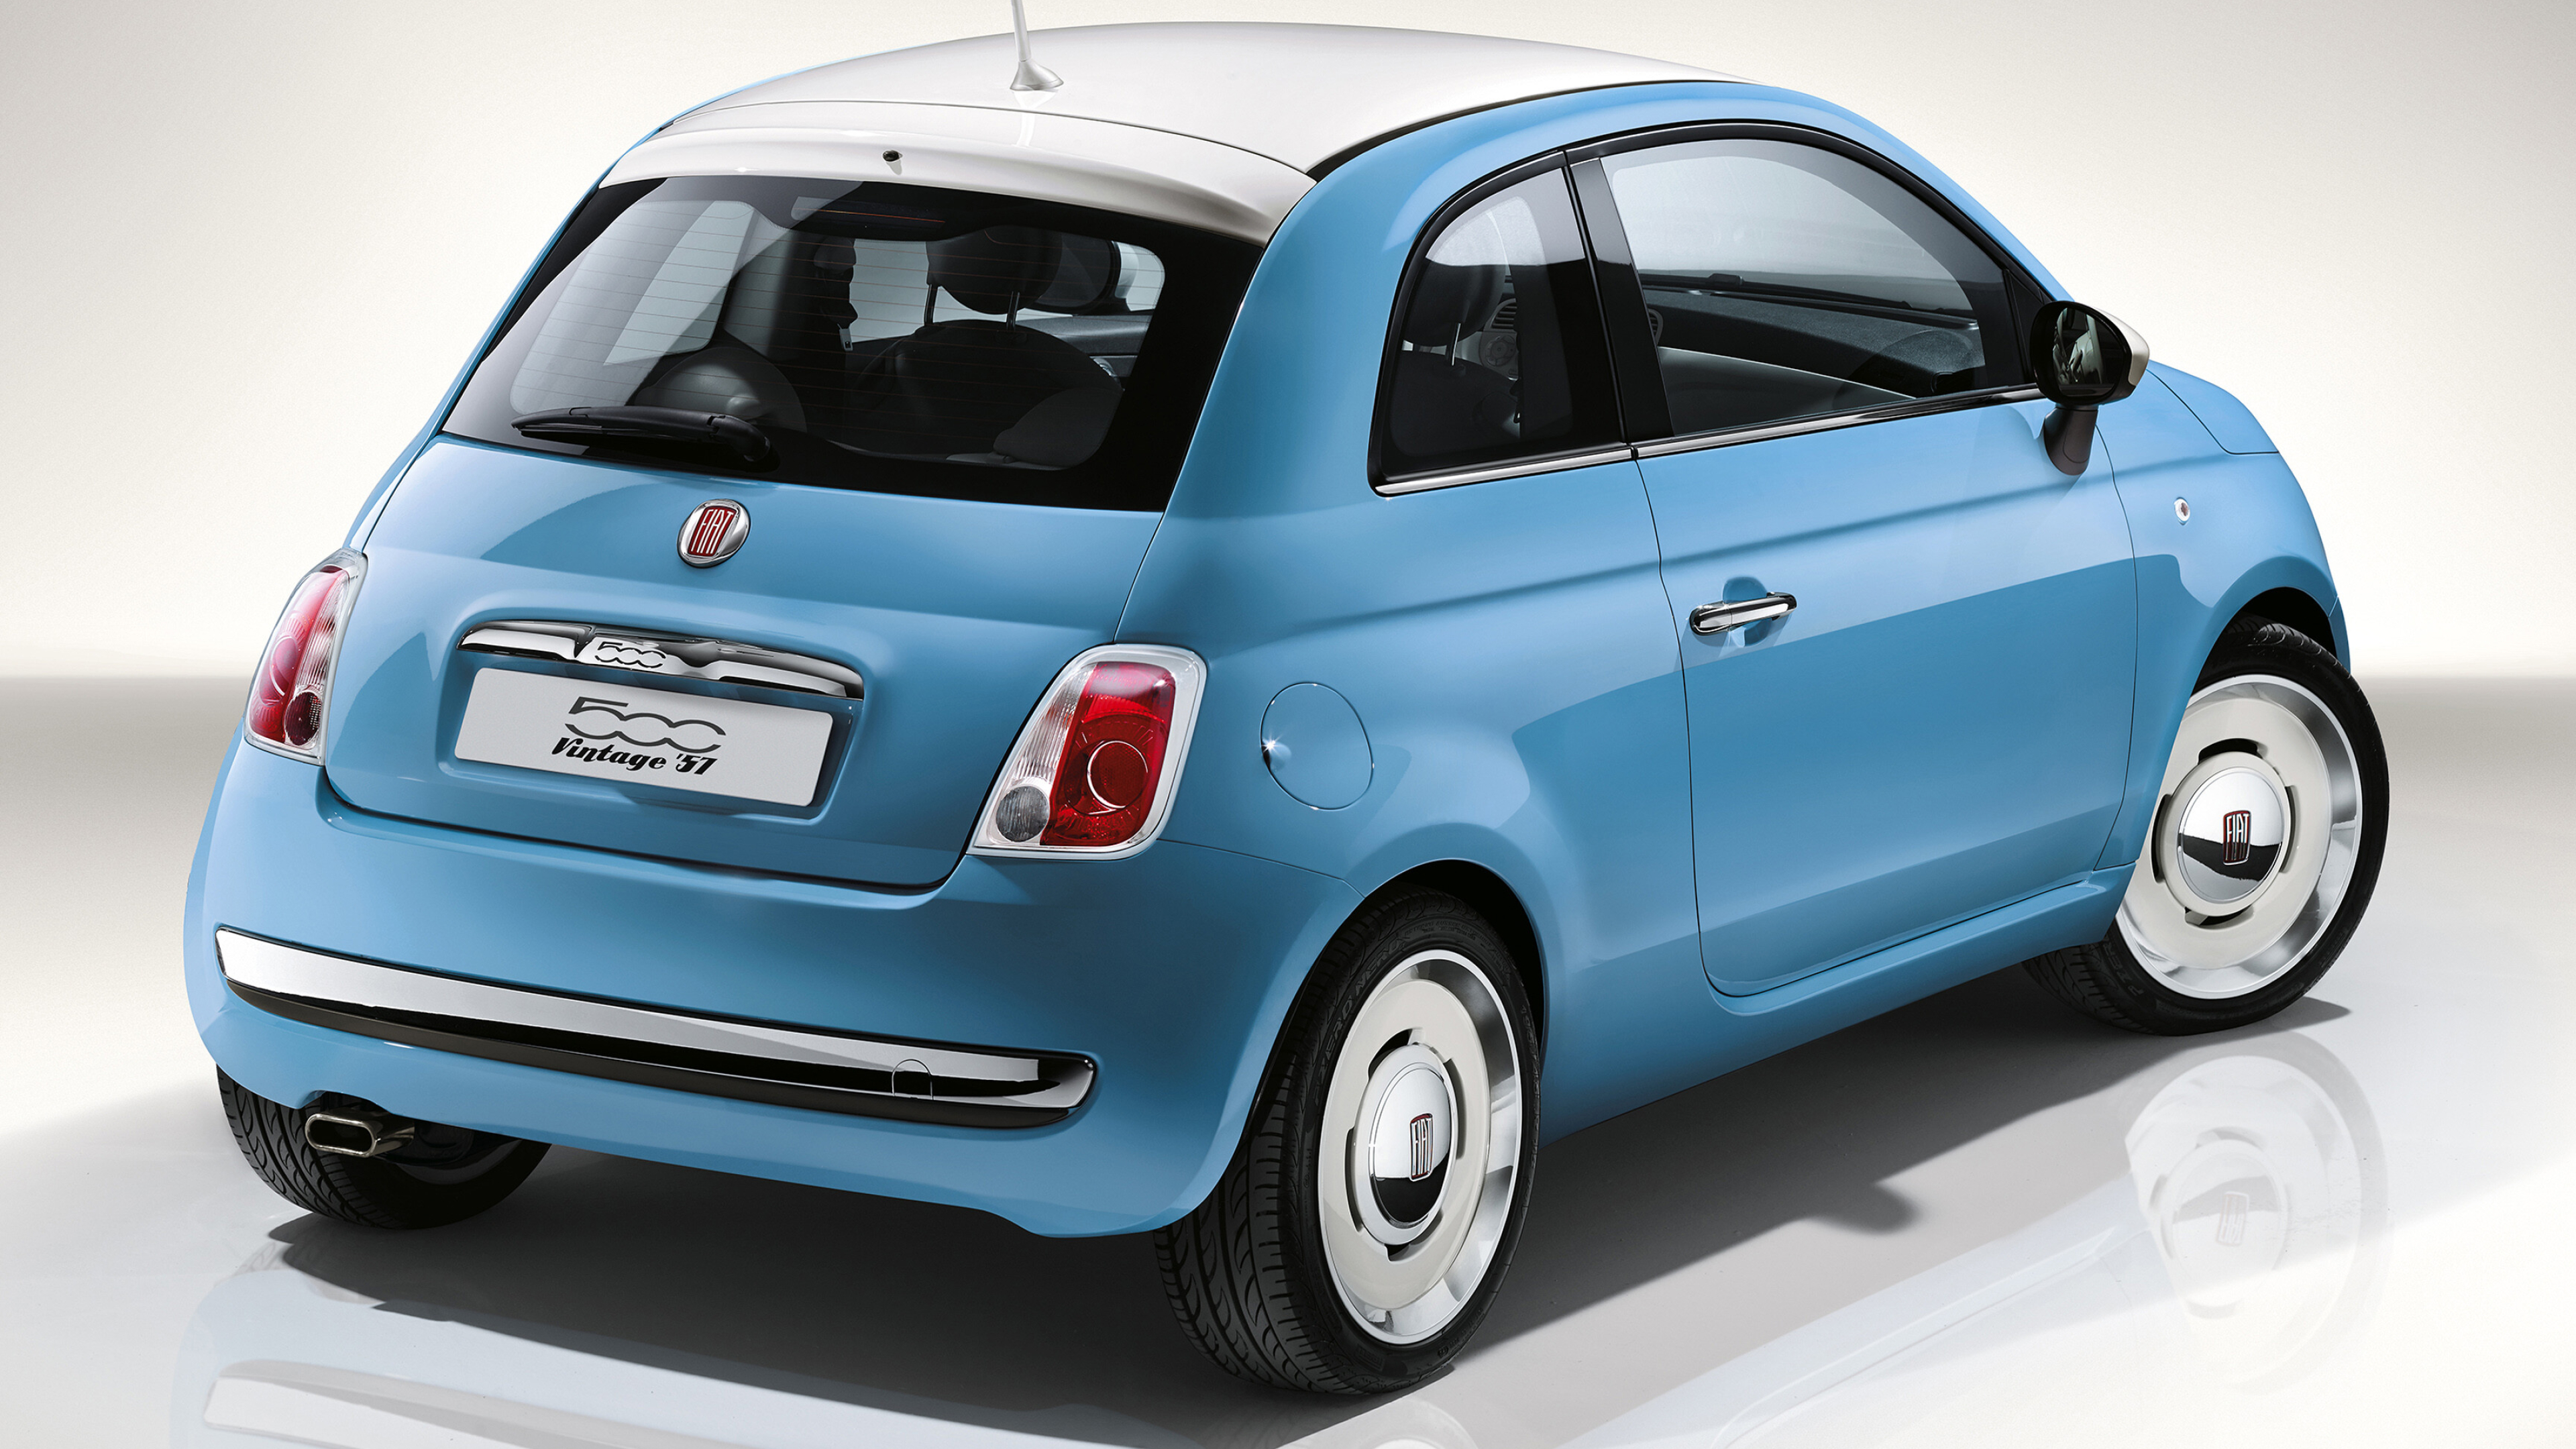 Fiat: It is available in hatchback coupe and fixed-profile convertible body styles, Motor vehicle. 3840x2160 4K Wallpaper.